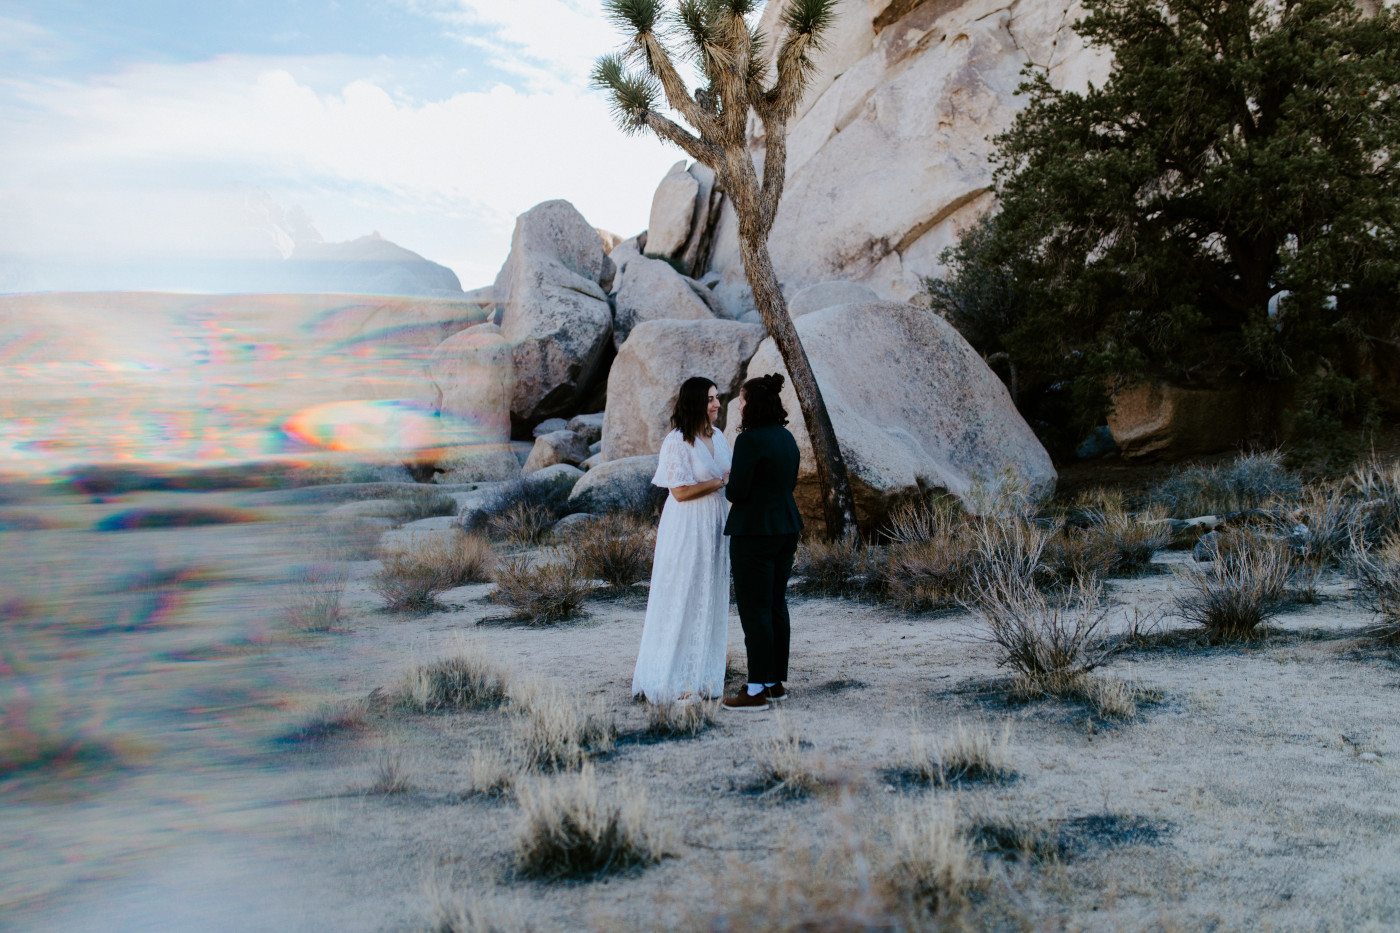 Madison and Becca kiss in the desert.